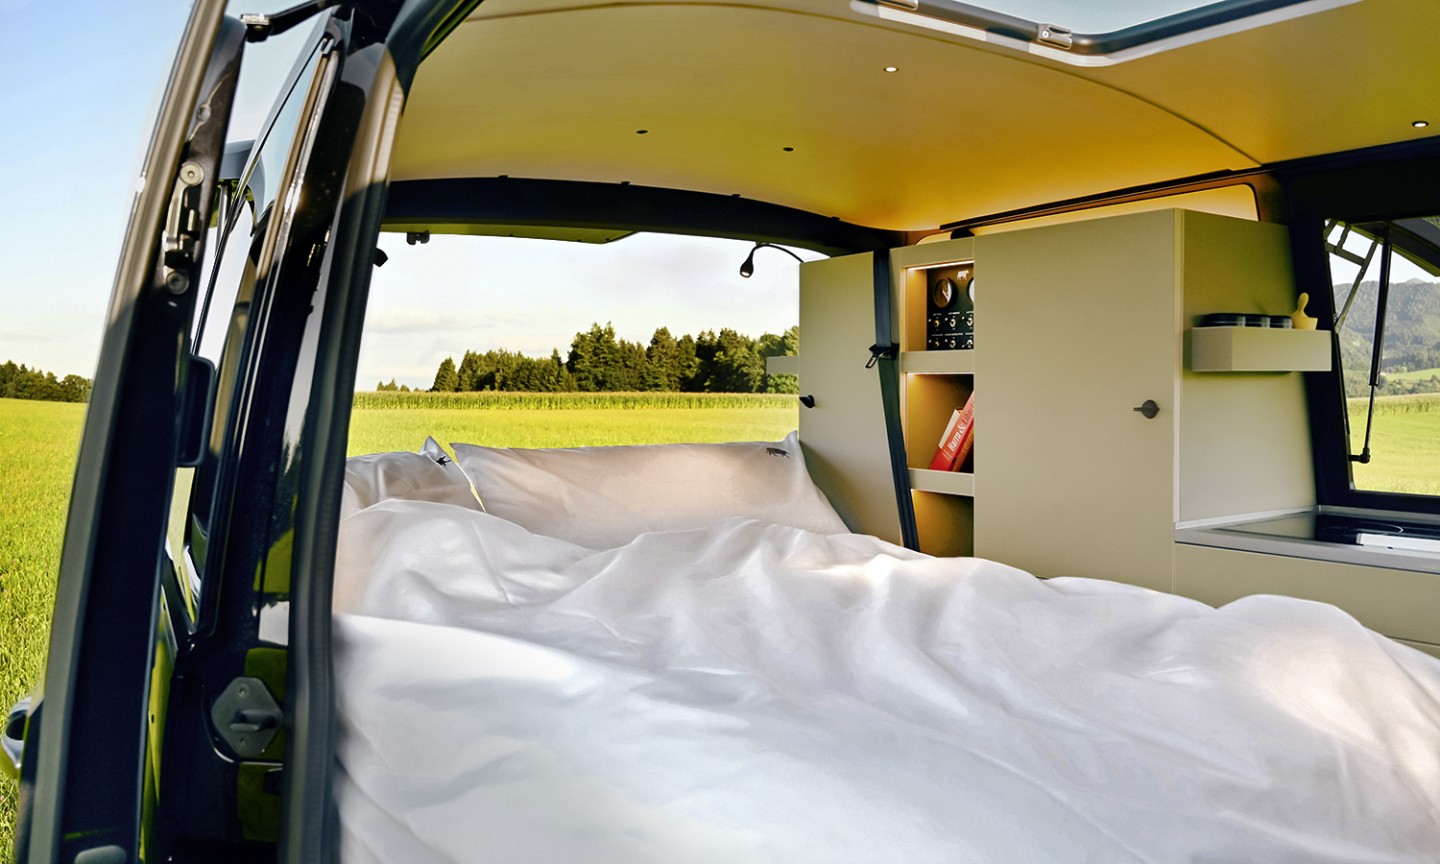 The new motorhome is based on a Volkswagen T6.1 and boasts a minimalist interior that is brimming with functionality